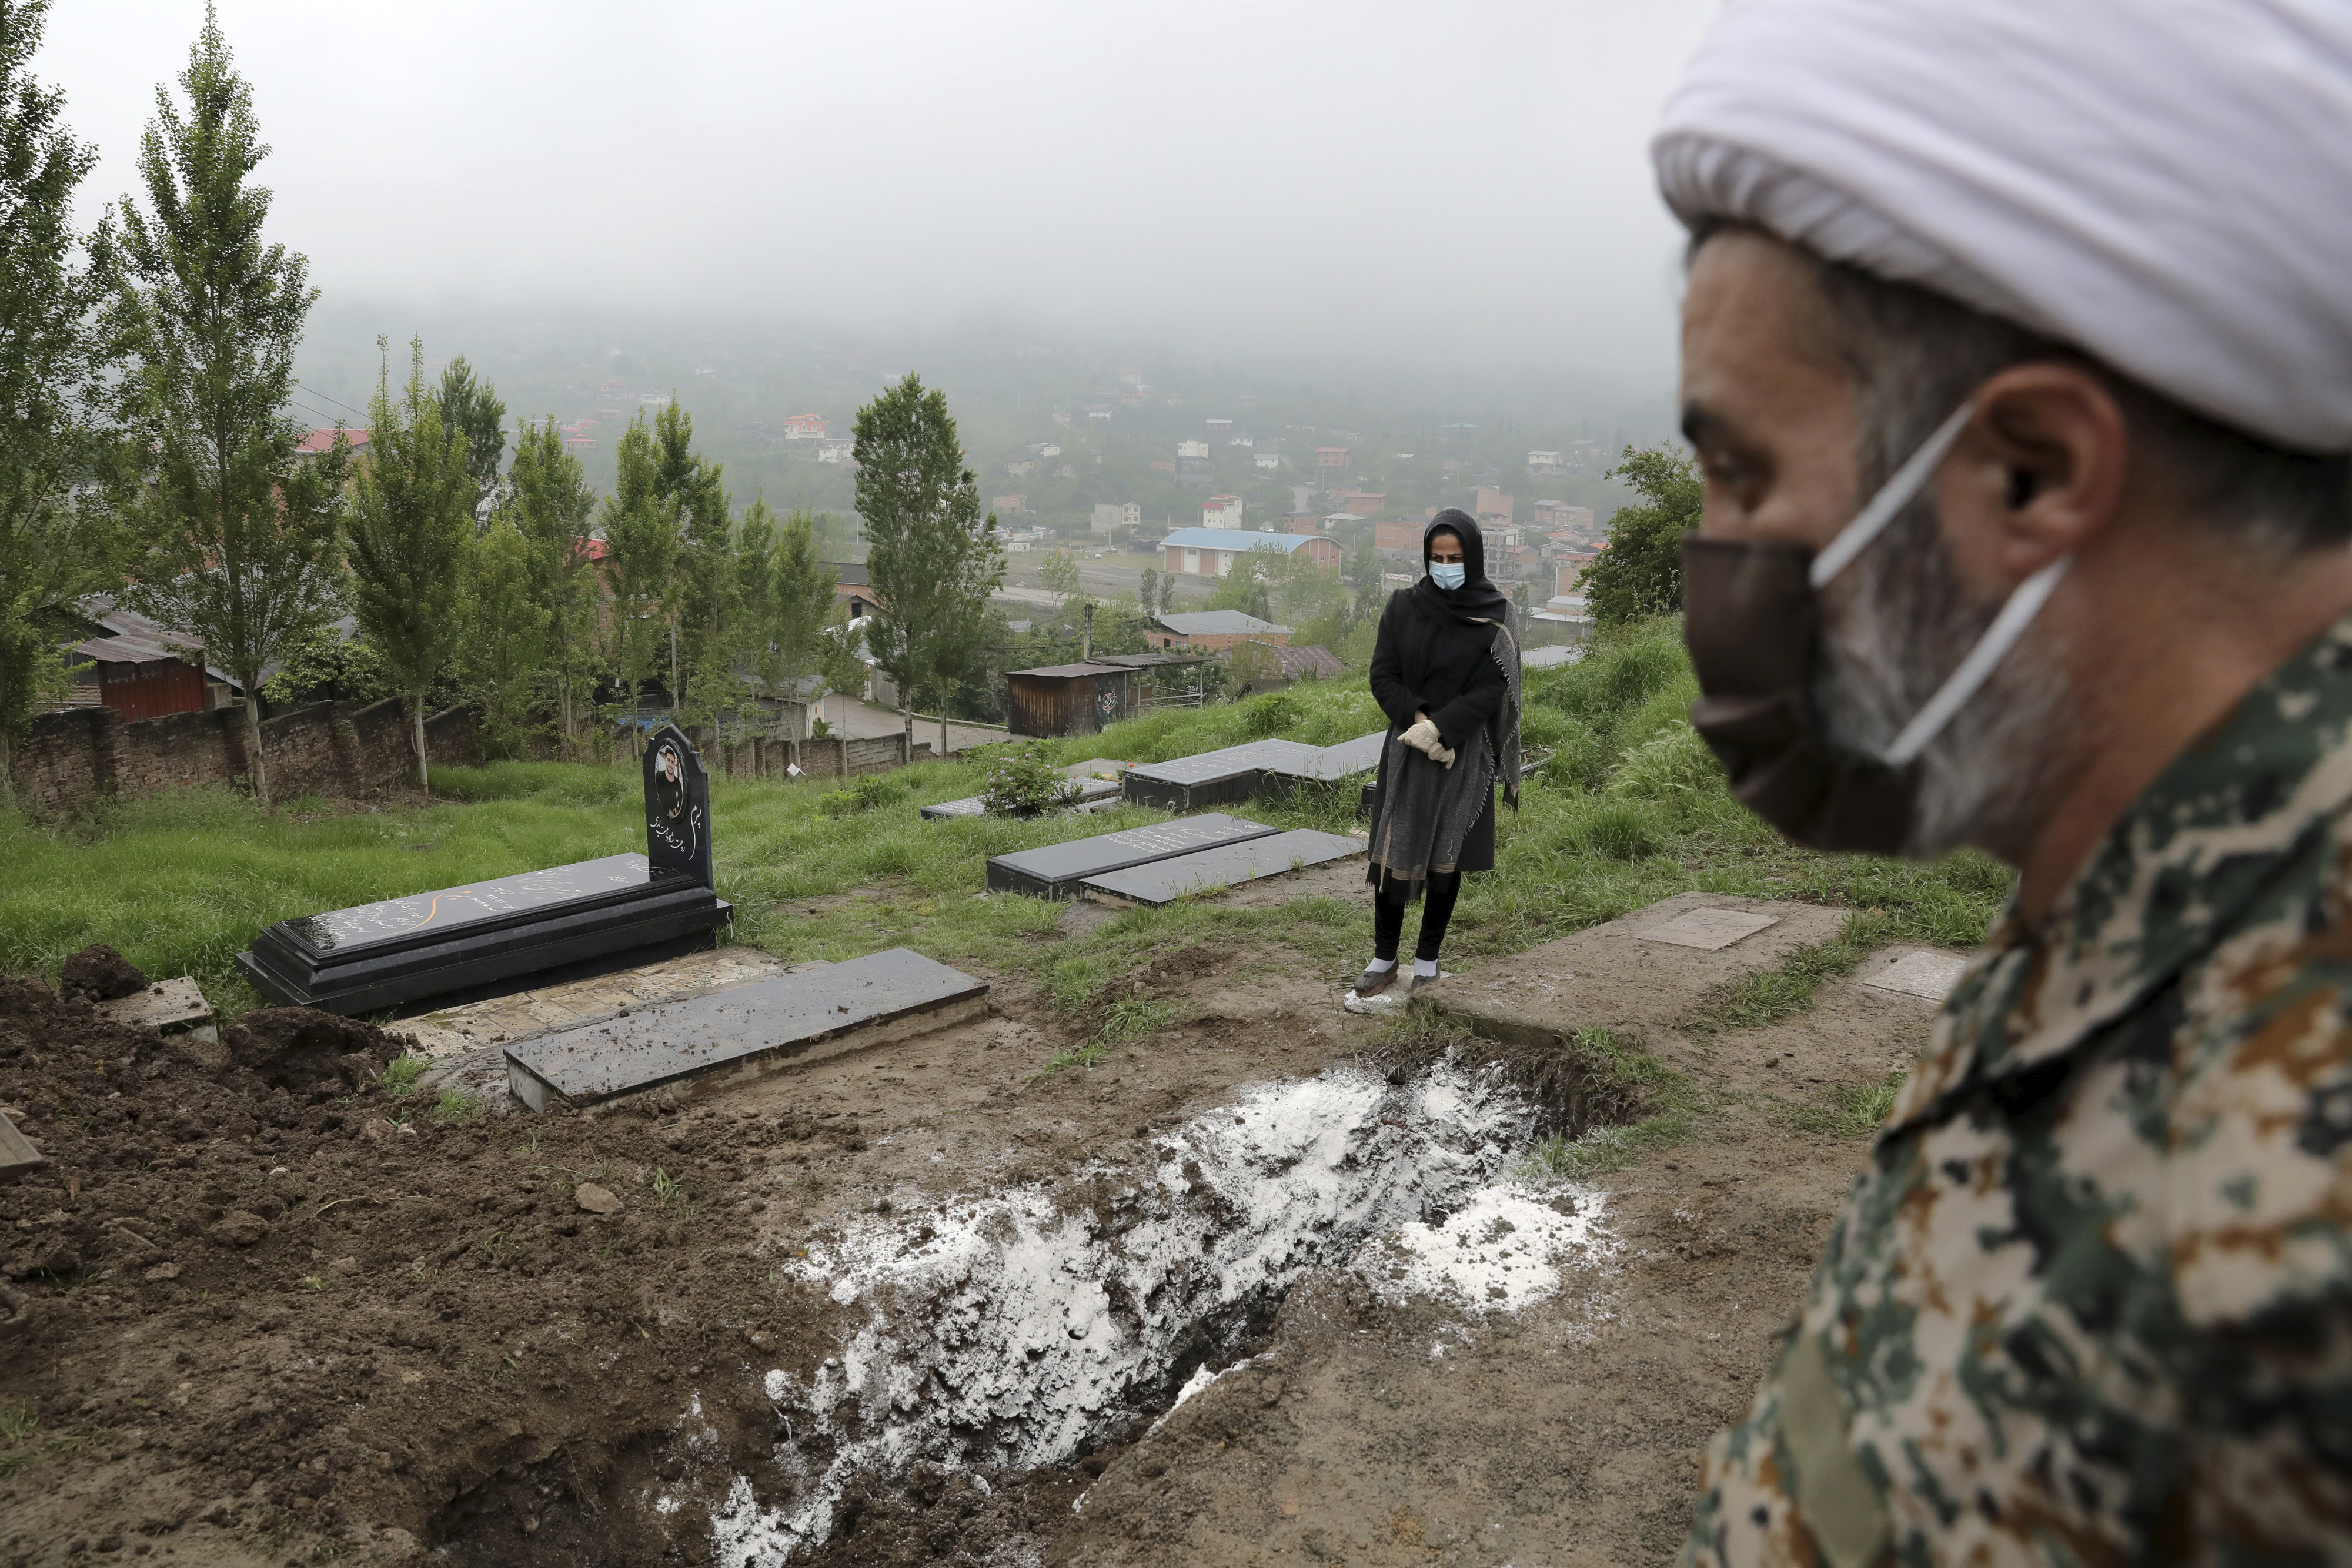 FILE - In this April 30, 2020 file photo, a woman wearing mask and gloves, prays at the grave of her mother who died from the new coronavirus, at a cemetery in the outskirts of the city of Babol, in northern Iran. Iranian state TV said Wednesday Oct. 7, 2020, that the country has hit its highest number of daily deaths from the coronavirus, with 239 new fatalities. Wednesday's report quotes the spokesperson of the country’s health ministry as saying the new deaths were recorded since Tuesday. (AP Photo/Ebrahim Noroozi, File)